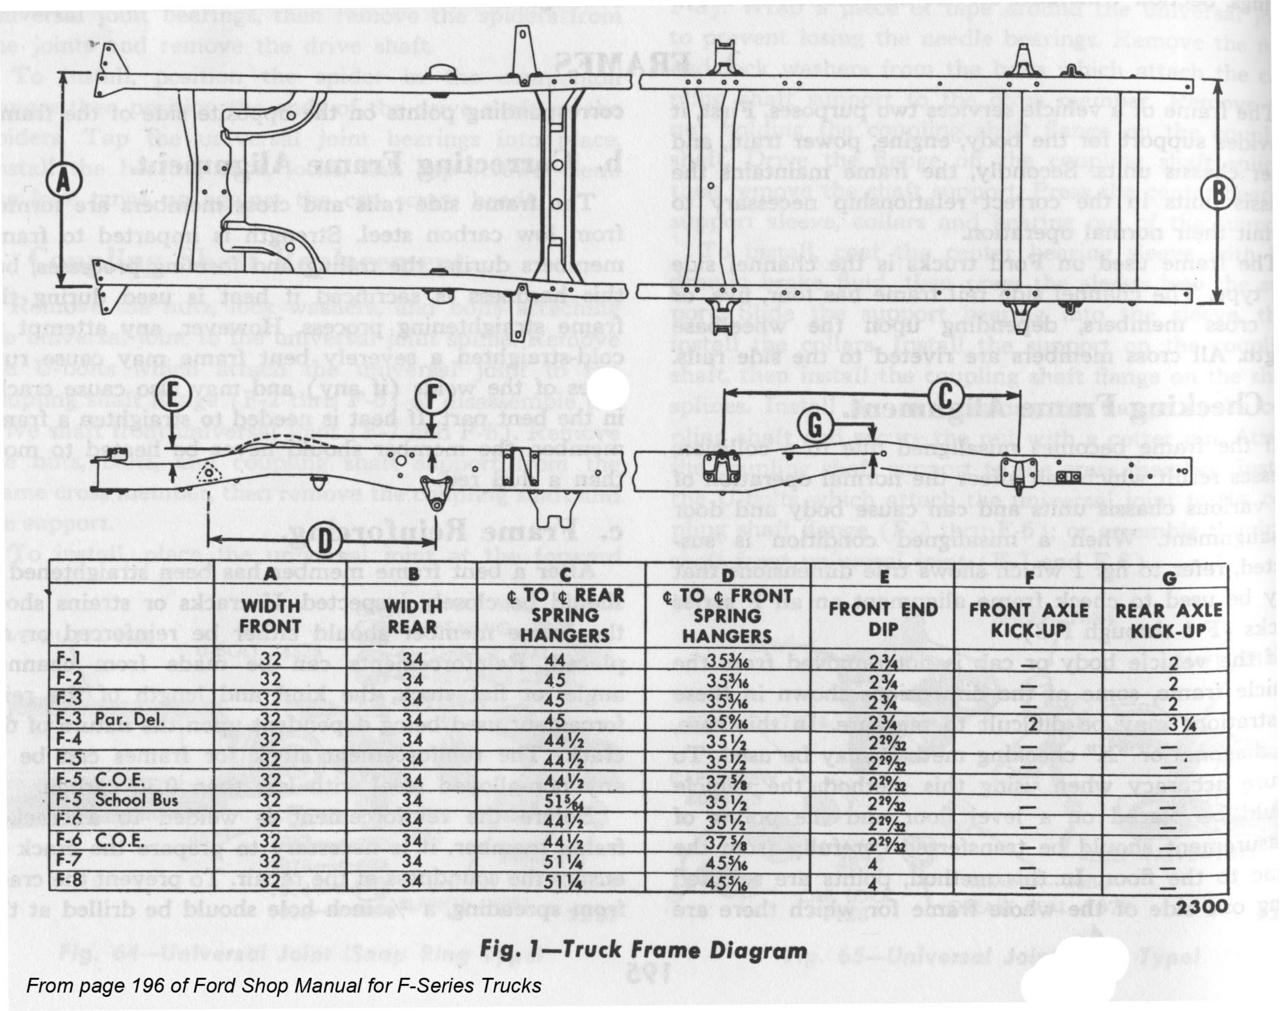 1950 Ford pickup specifications #5